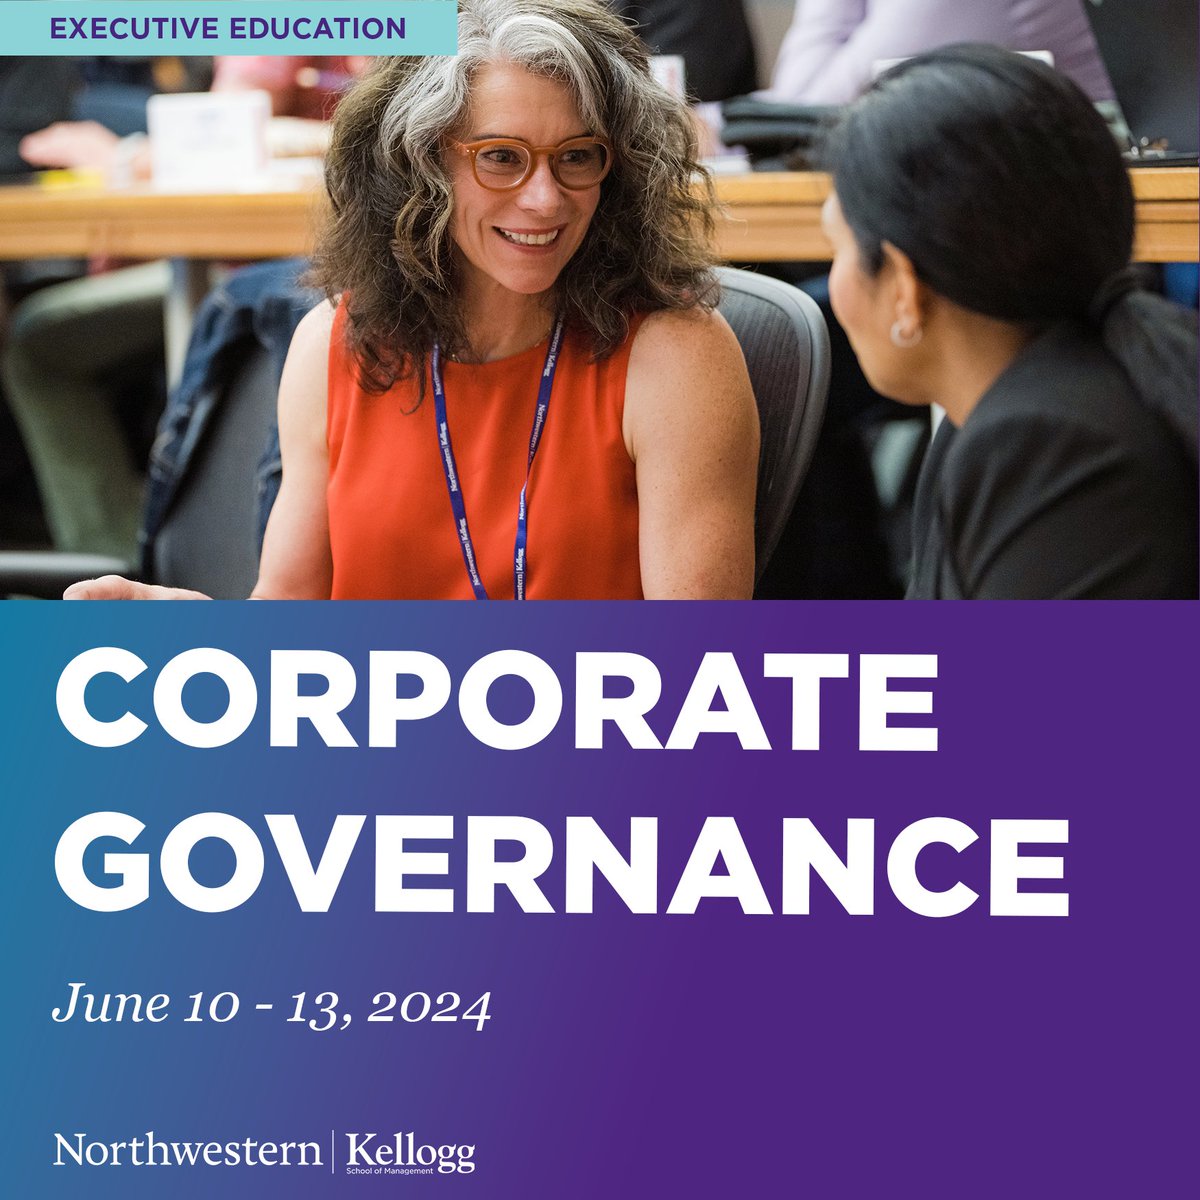 Unleash your potential as an influential board member with our Corporate Governance program. Led by top faculty, discover insights into navigating day-to-day complexities of the role & driving value creation for the organization. Join us in Evanston: kell.gg/tdirector